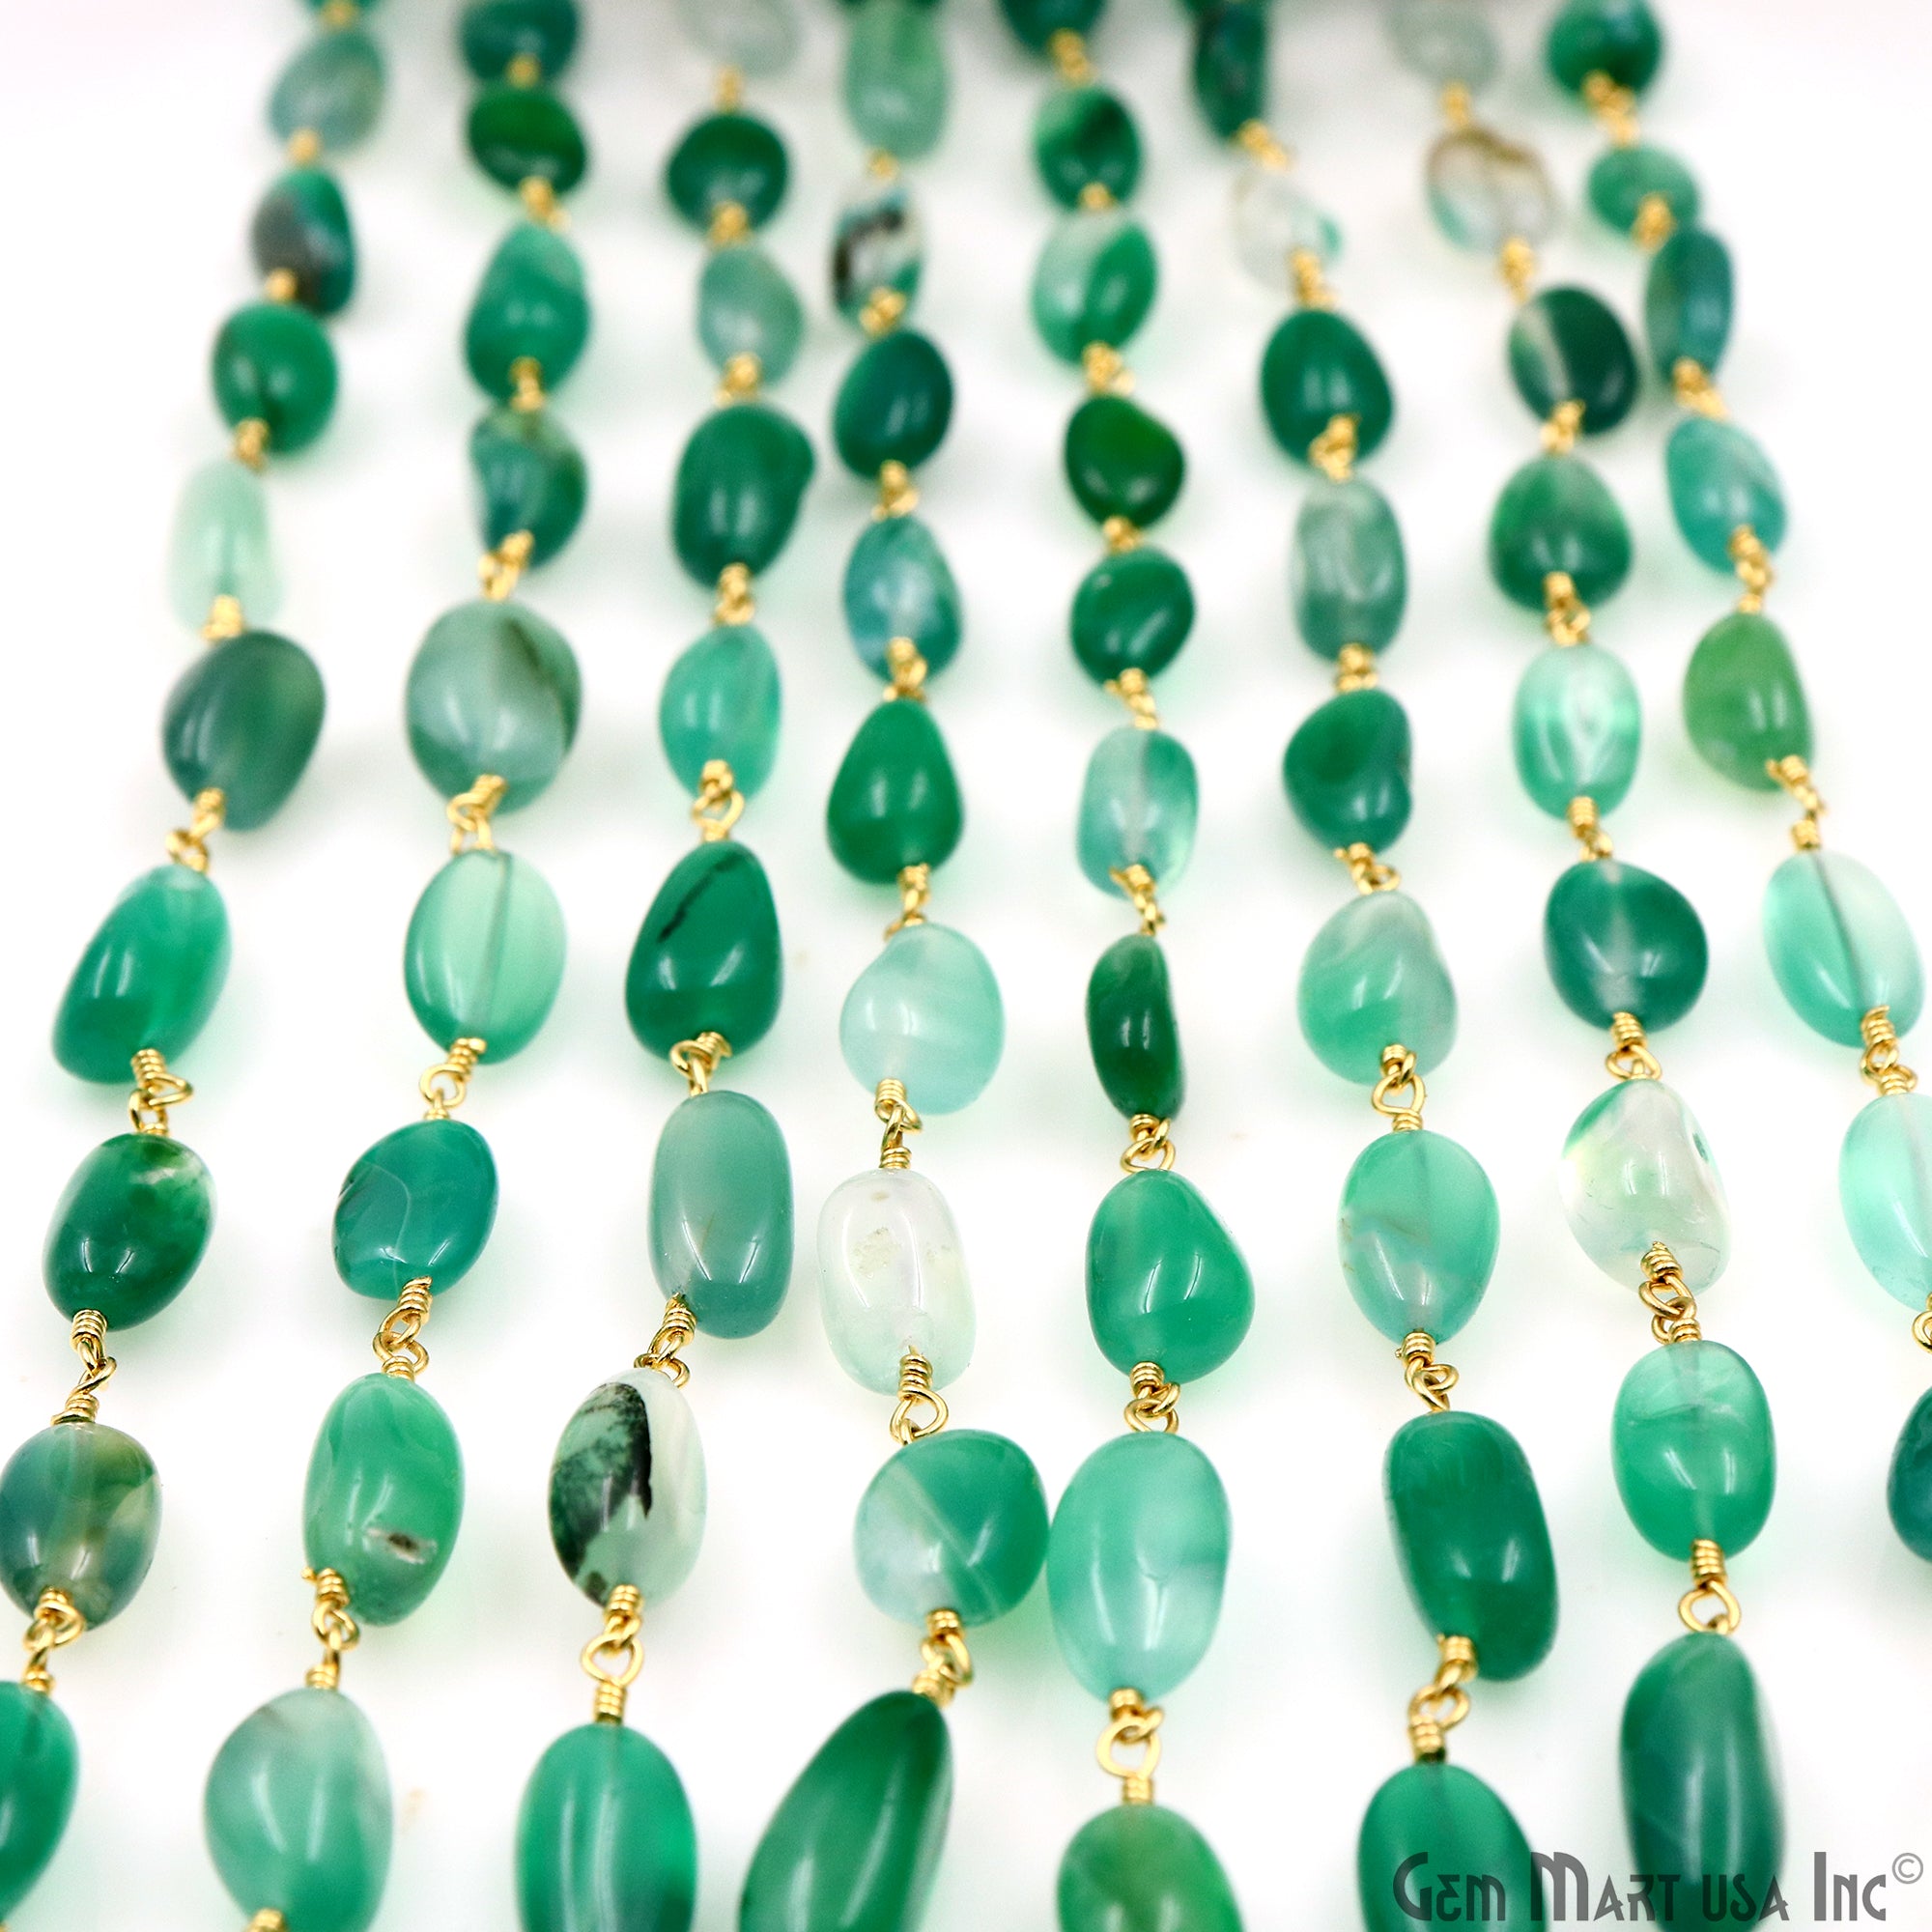 Shaded Green Onyx 12x5mm Tumble Beads Gold Plated Rosary Chain